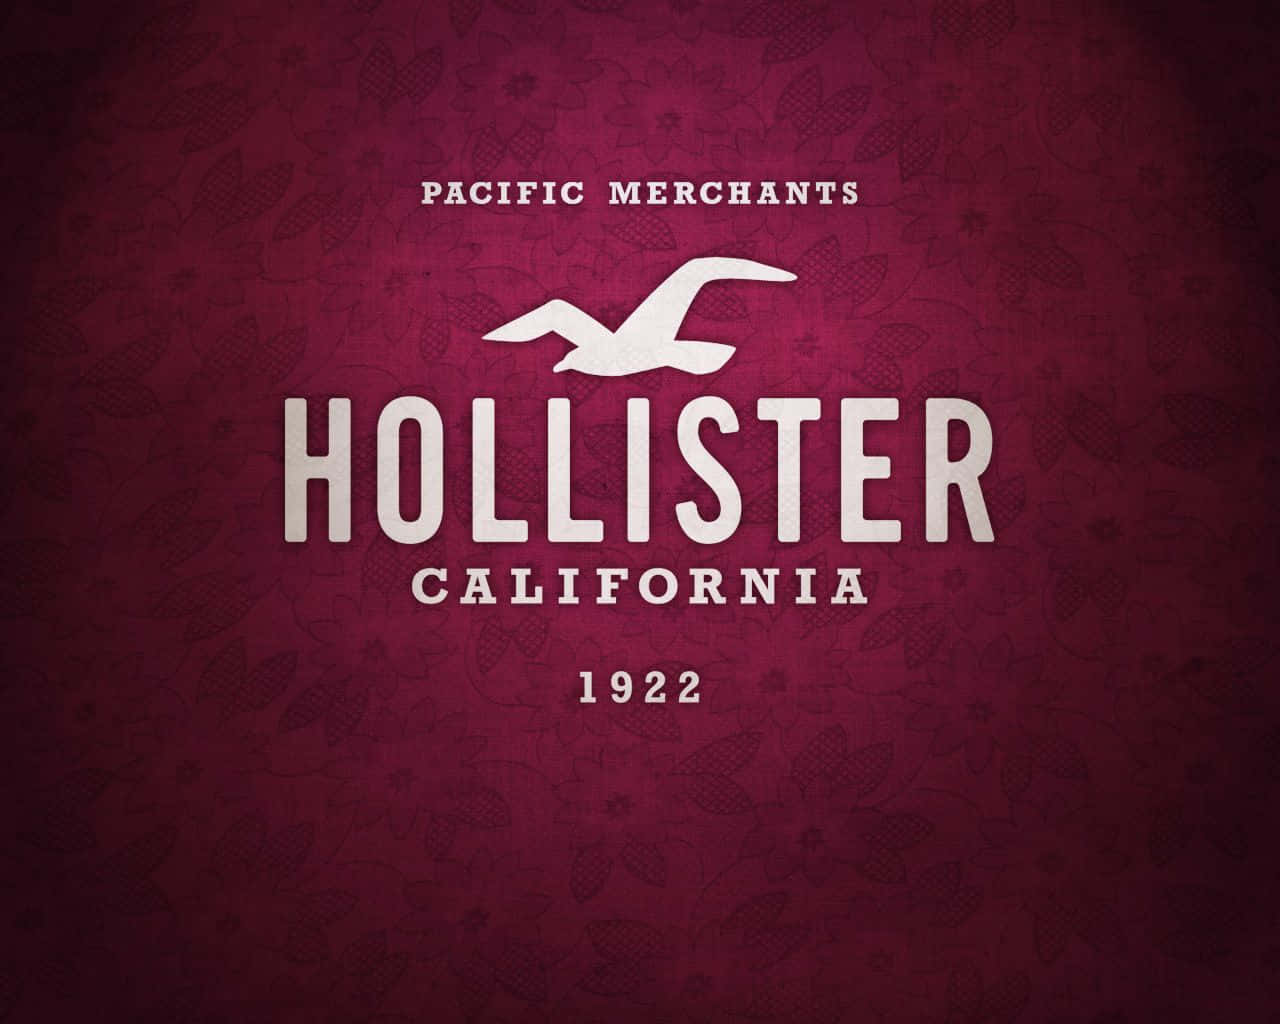 Fresh and carefree vibes of Hollister.